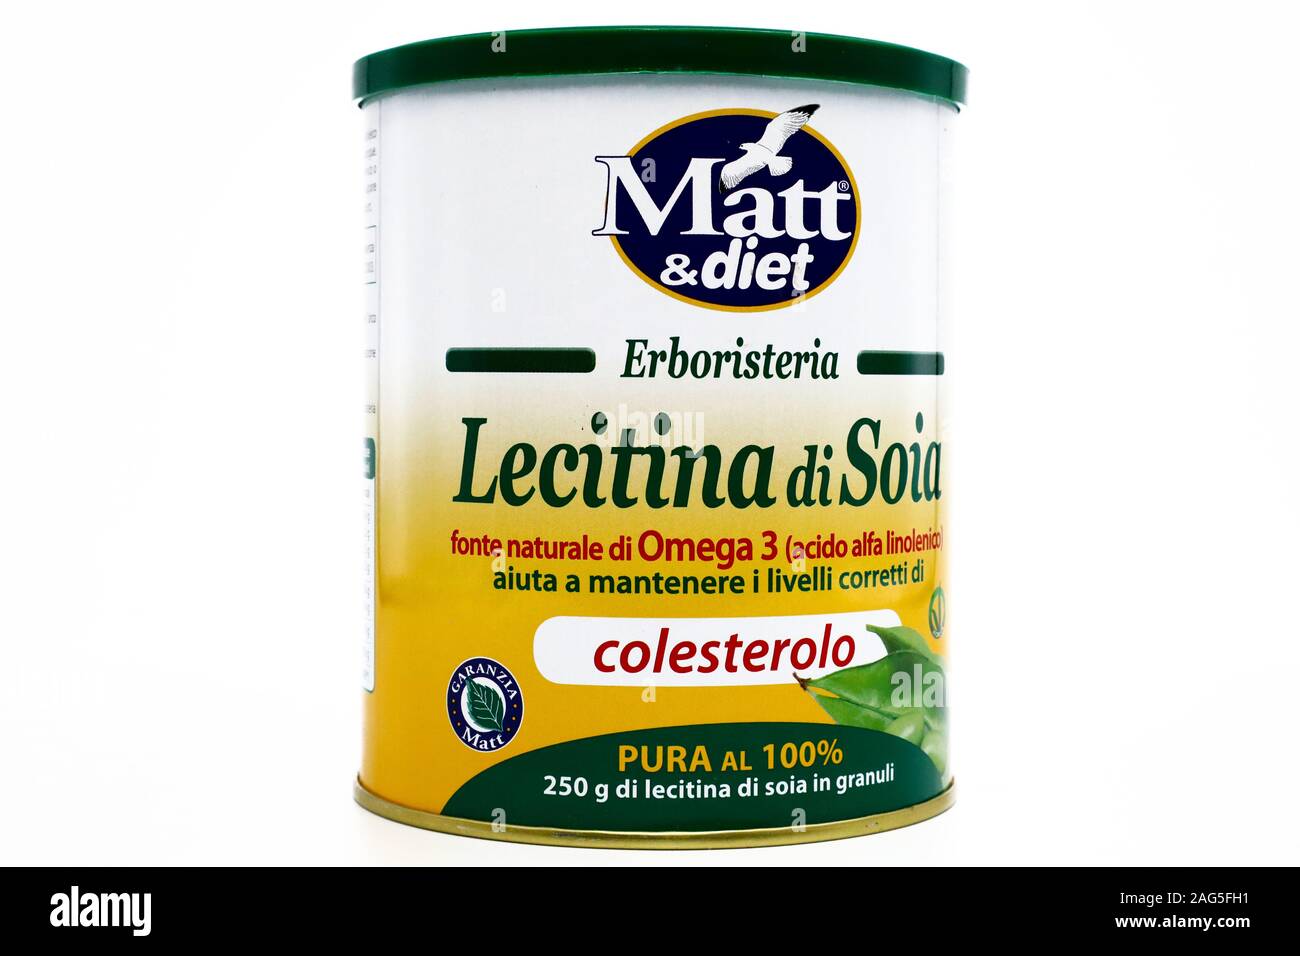 Matt & diet Soy Lecithin granules. The Soy lecithin is efficacy in reducing cholesterol and risk of cardiovascular disease Stock Photo